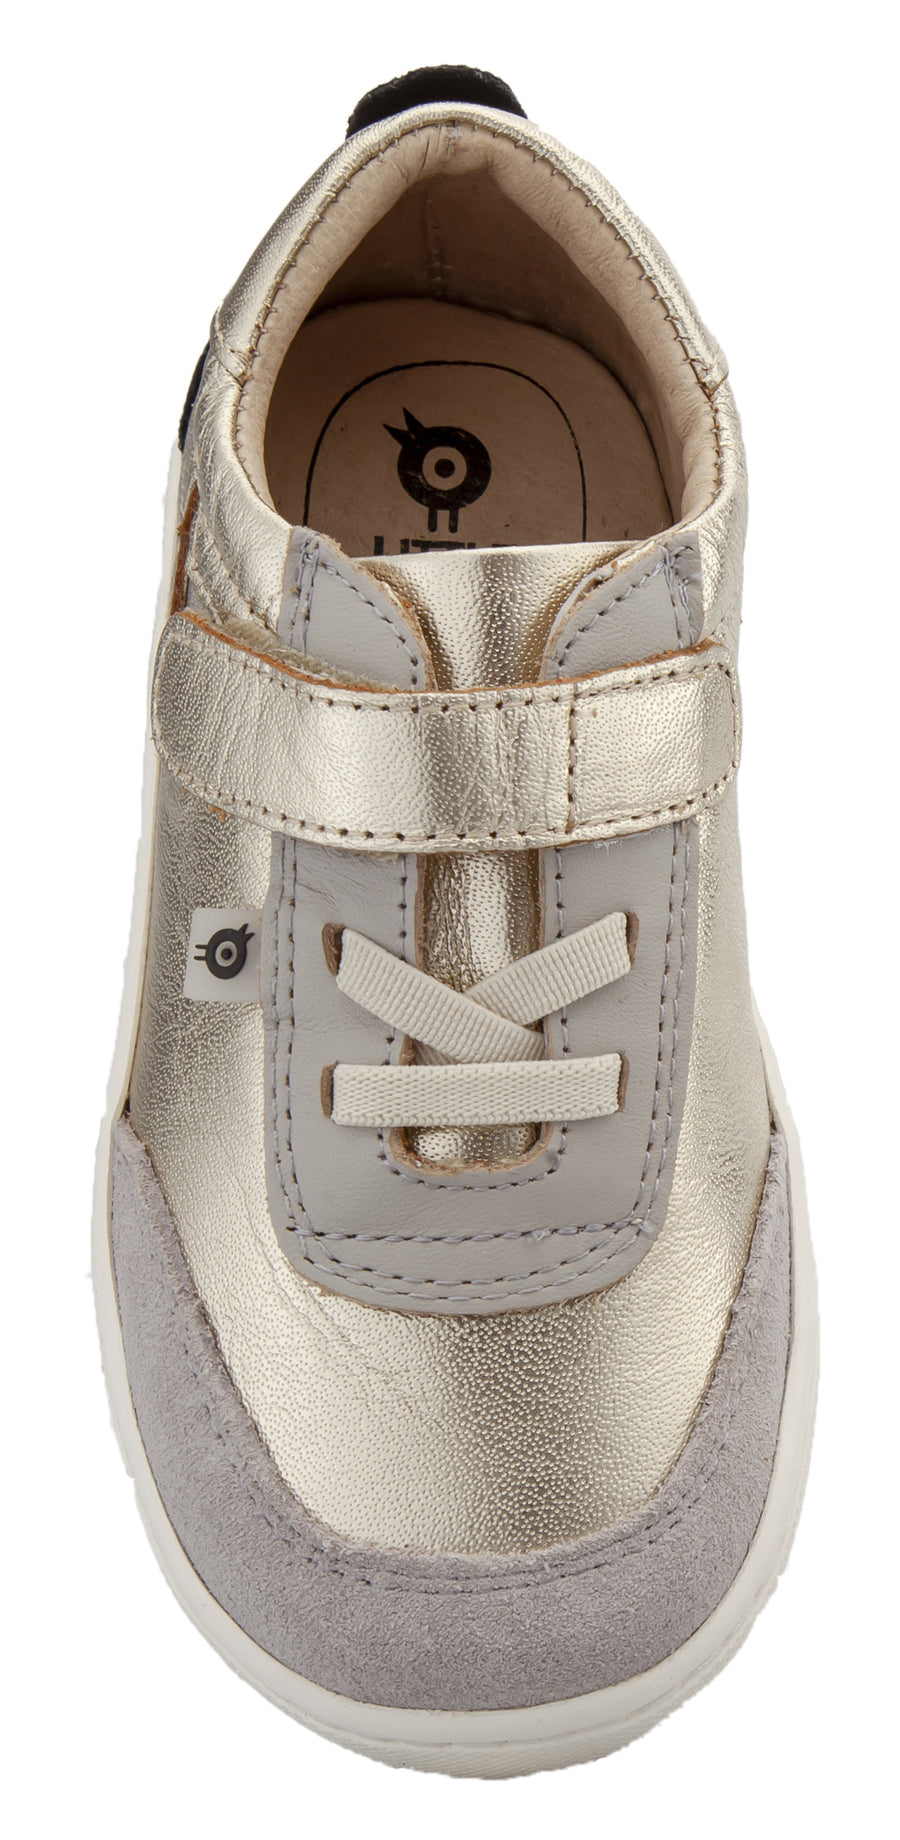 Old Soles Boy's & Girl's 6103 You Beaut Sneakers - Gold/Gris/Brown Serp